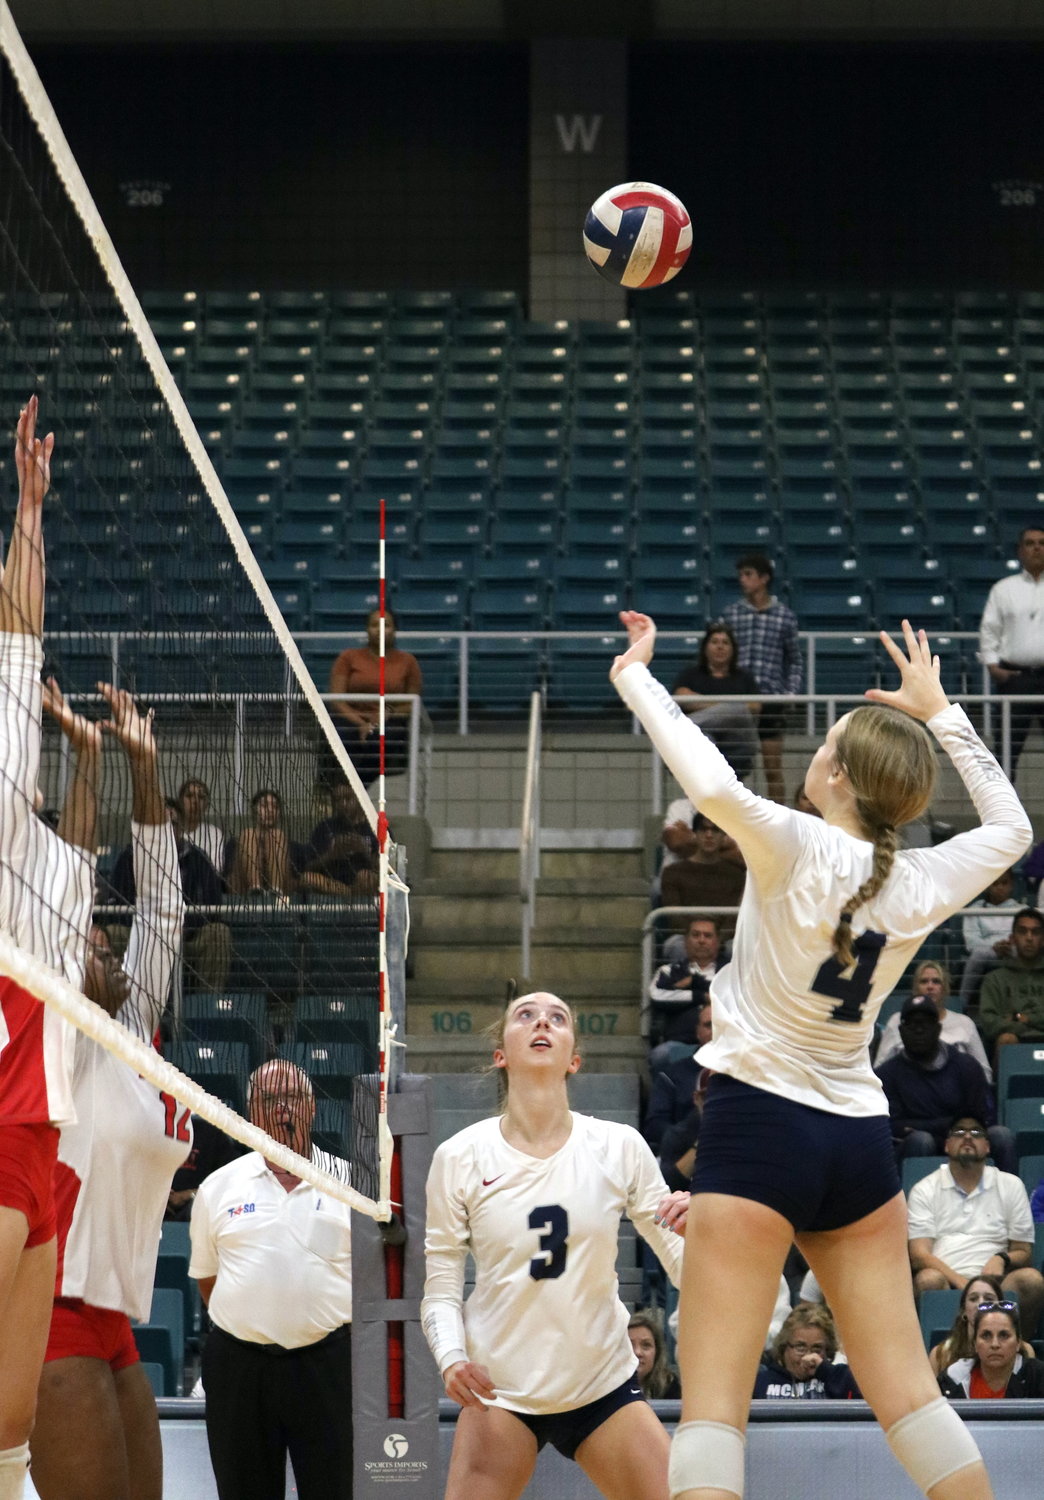 Callie Funk sets up to spike the ball during Tuesday’s bi-district playoff game between Tompkins and Fort Bend Austin at the Merrell Center.